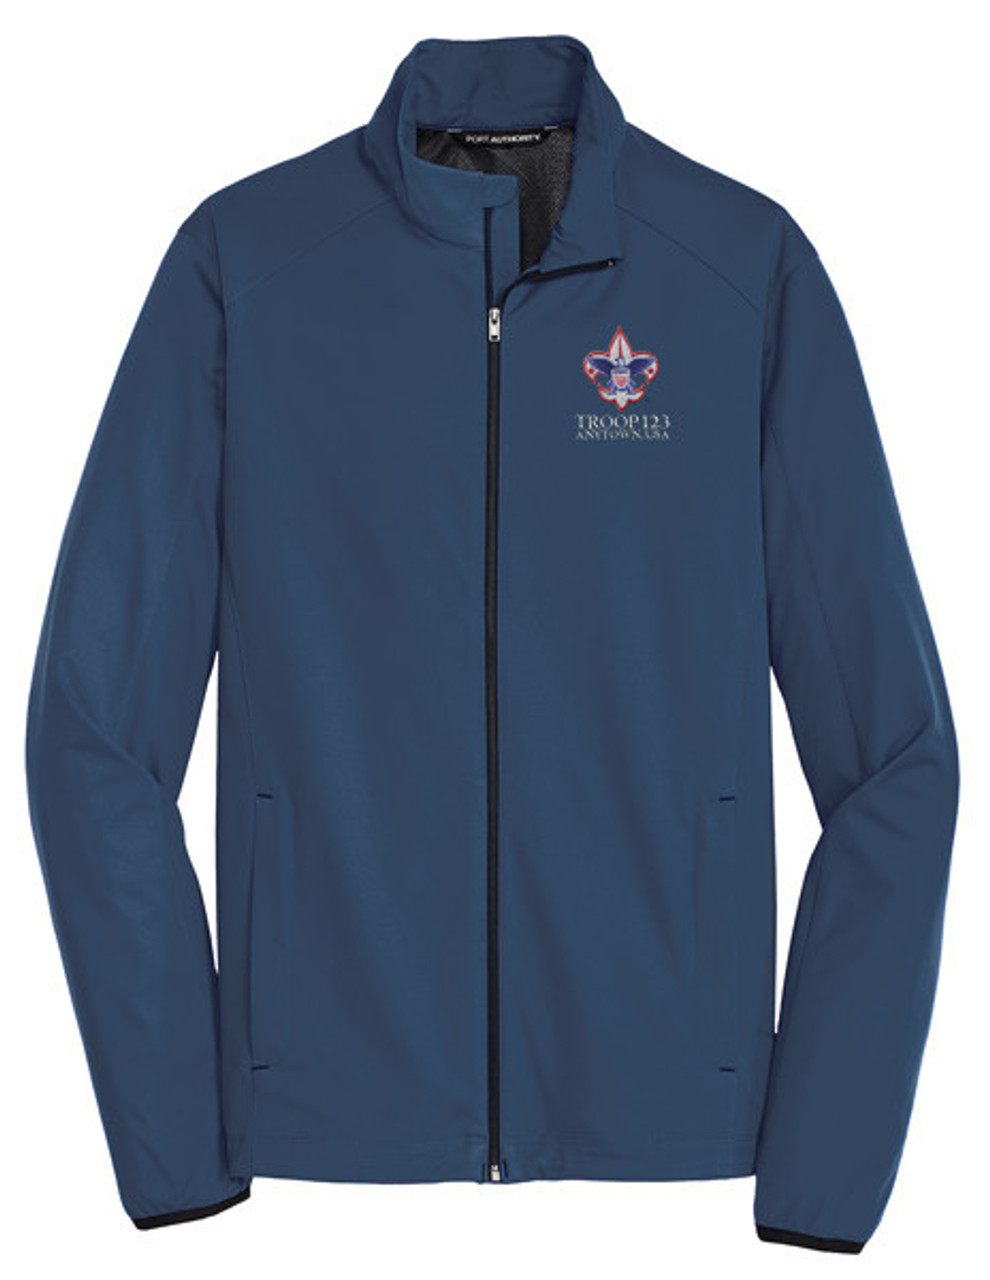 Active Soft Shell Jacket with Embroidered BSA Corporate Logo